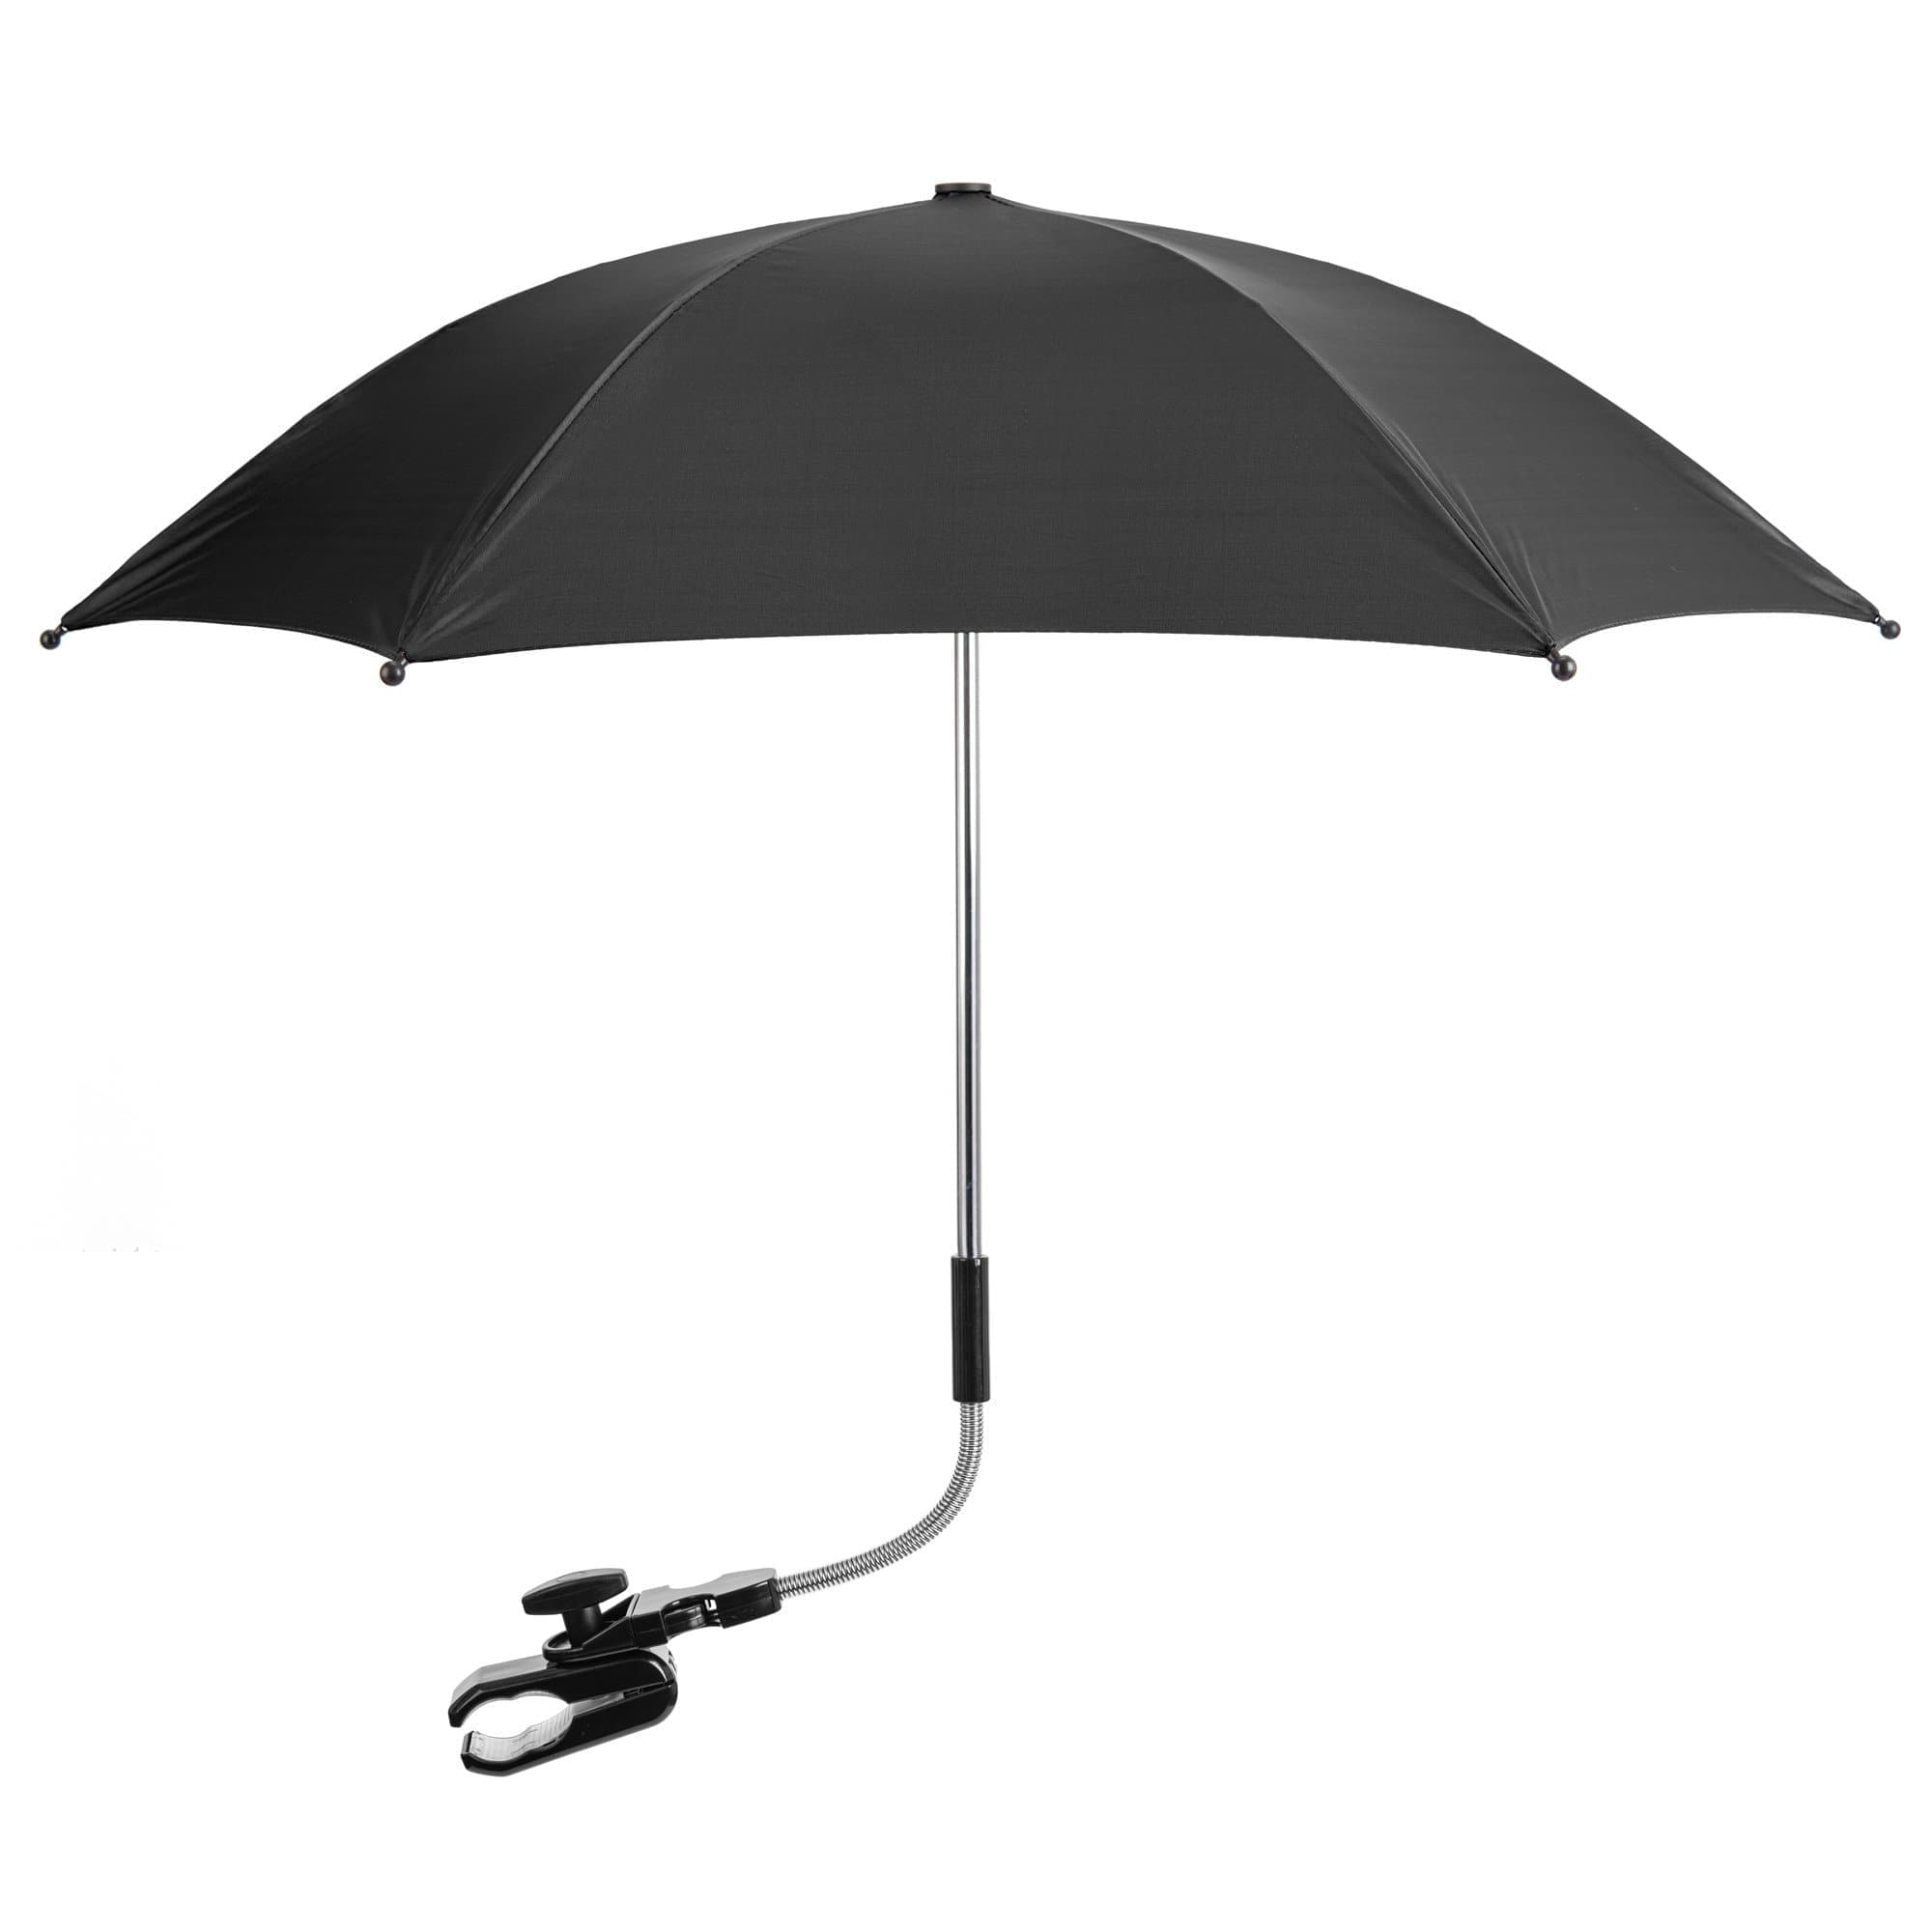 Baby Parasol Compatible With Ickle Bubba - Fits All Models - For Your Little One